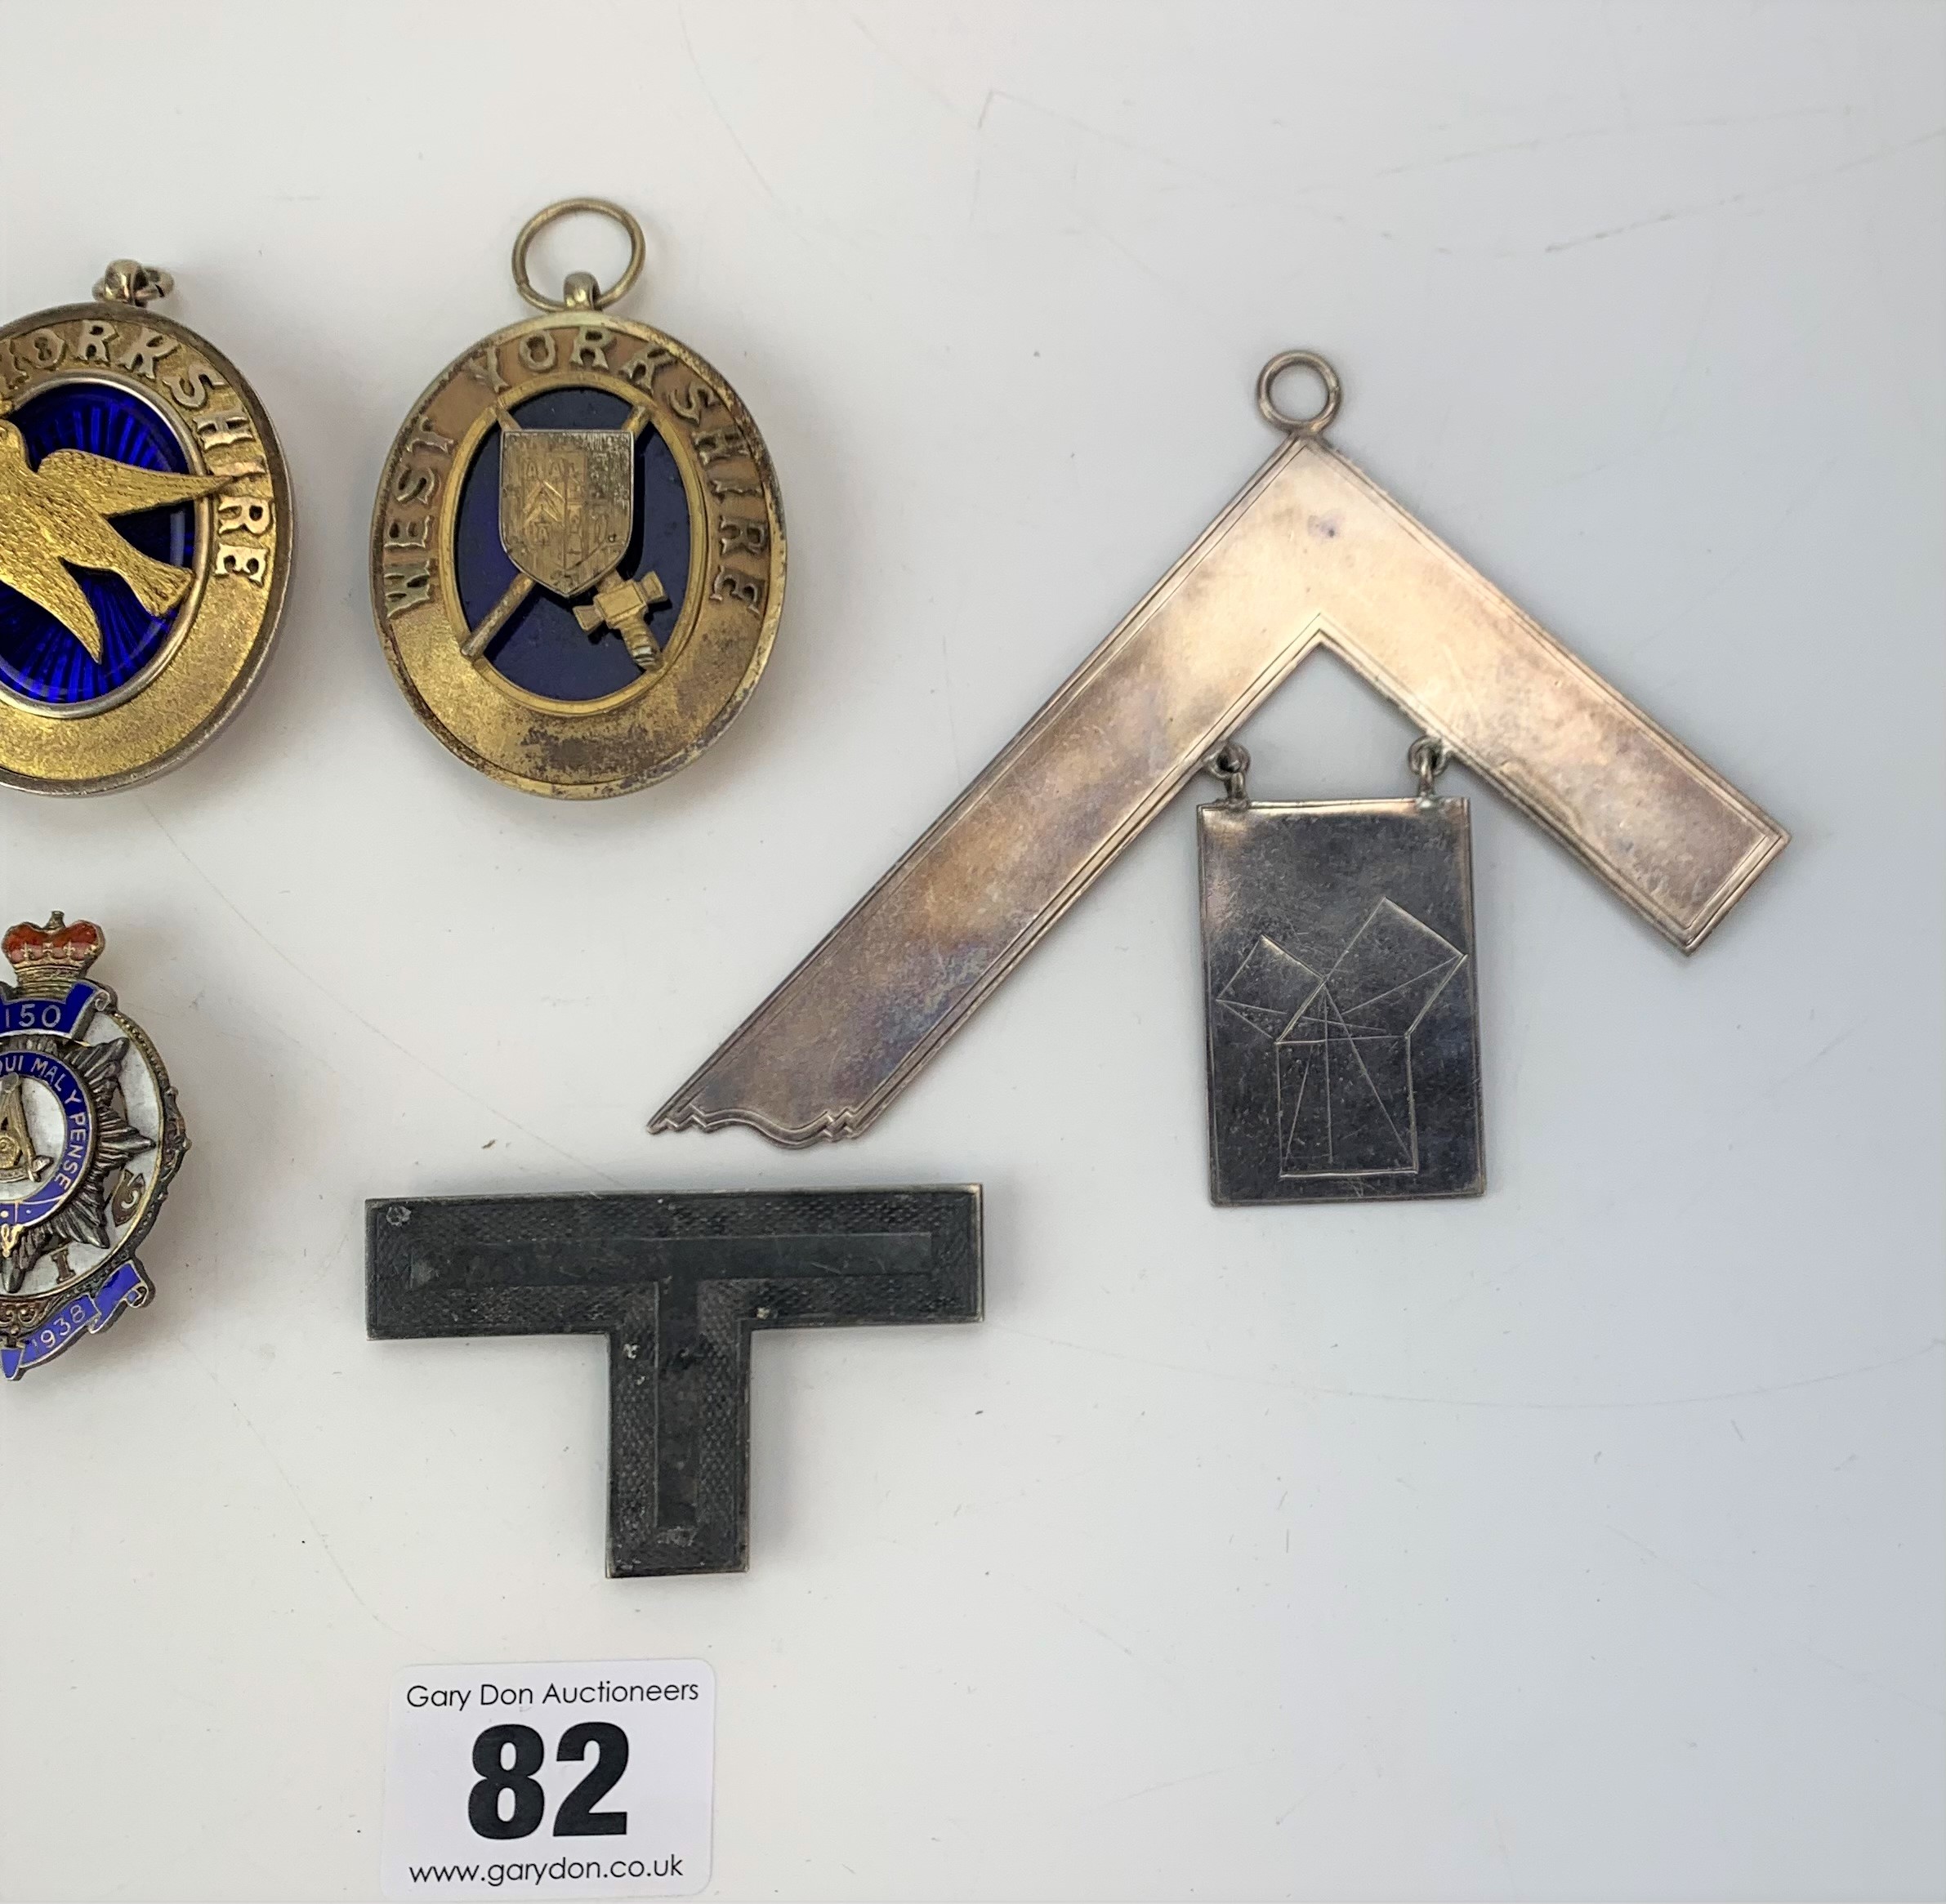 6 silver Masonic medals - Image 4 of 7